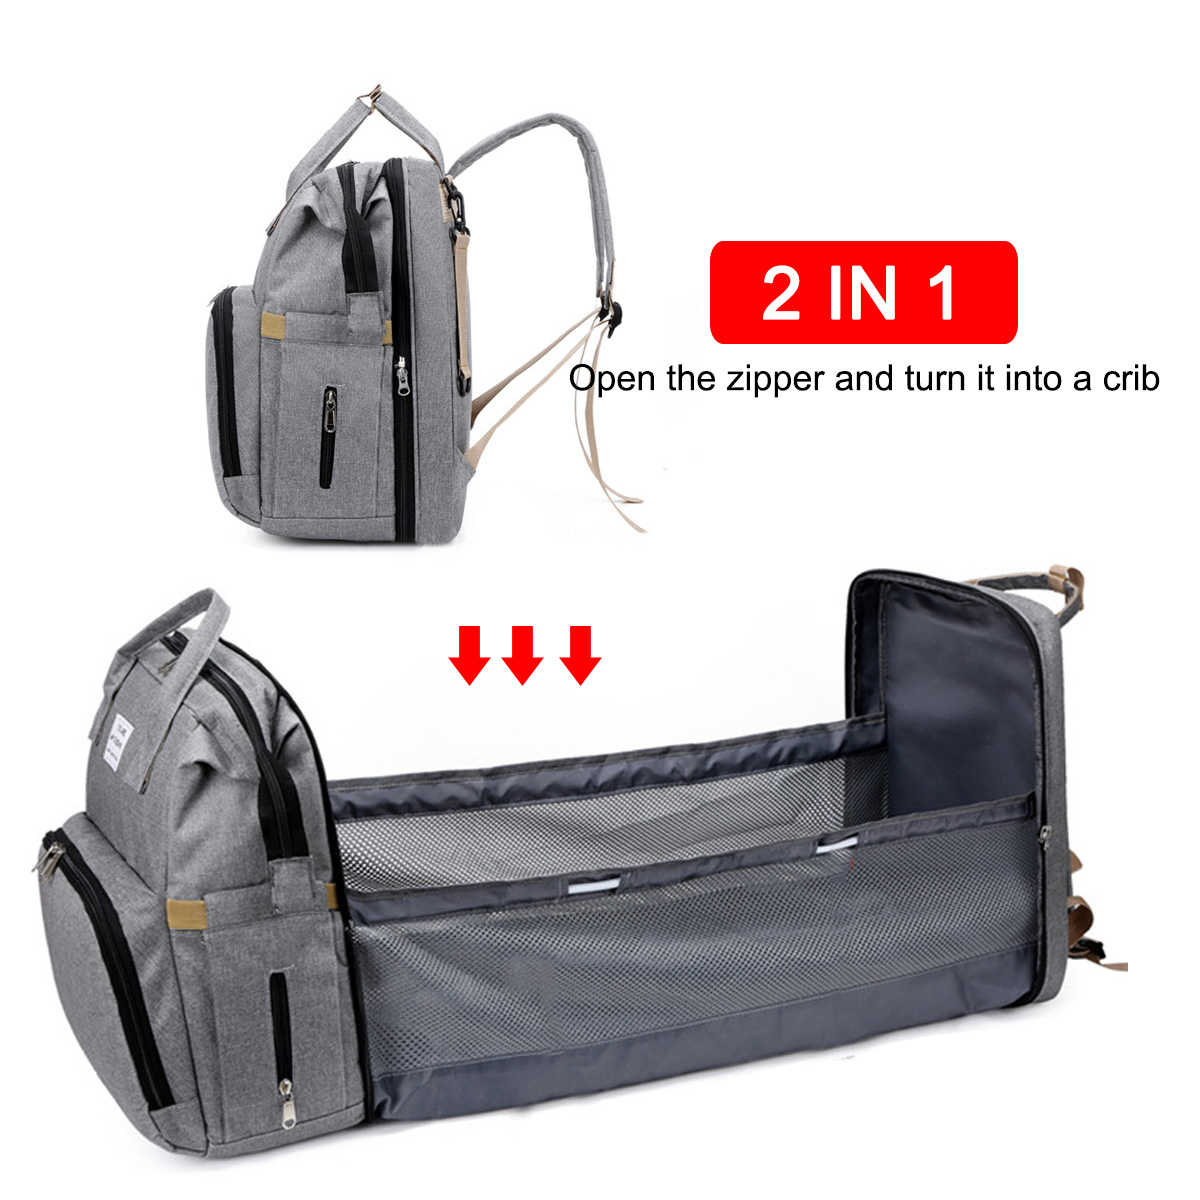 2 IN 1 Foldable Diaper Bag Large Capacity Baby Crib Backpack Nappy Mummy Bags For Mom Outdoors Travel